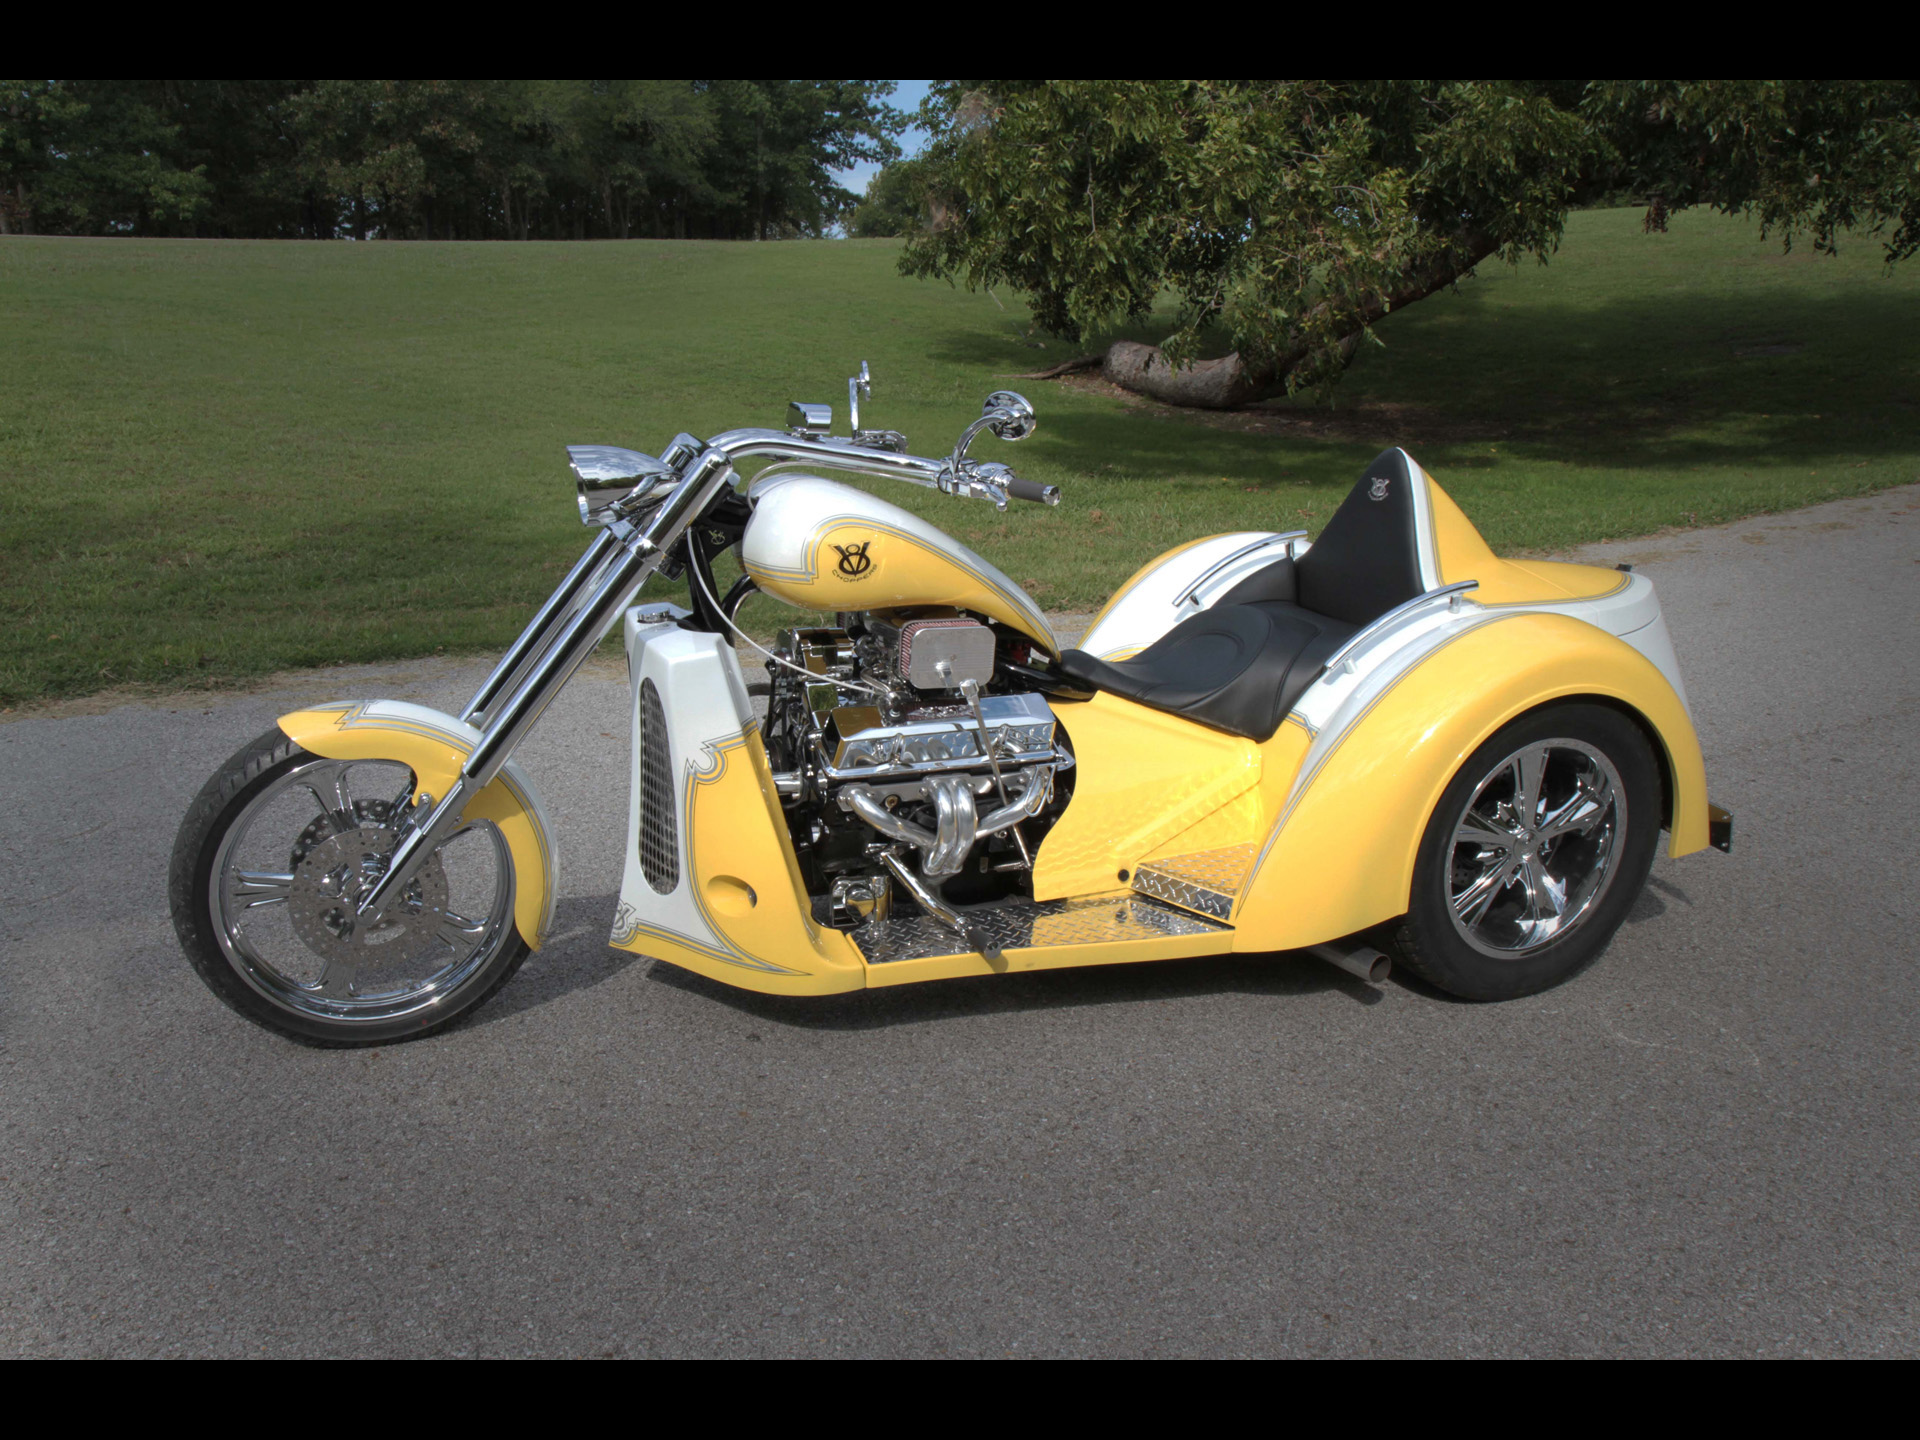 2011, V8 choppers, Sp series, Touring, Trike, Muscle, V 8, Chopper, Choppers, Hot, Rod, Rods, Bike, Engine, Engines, Gb Wallpaper